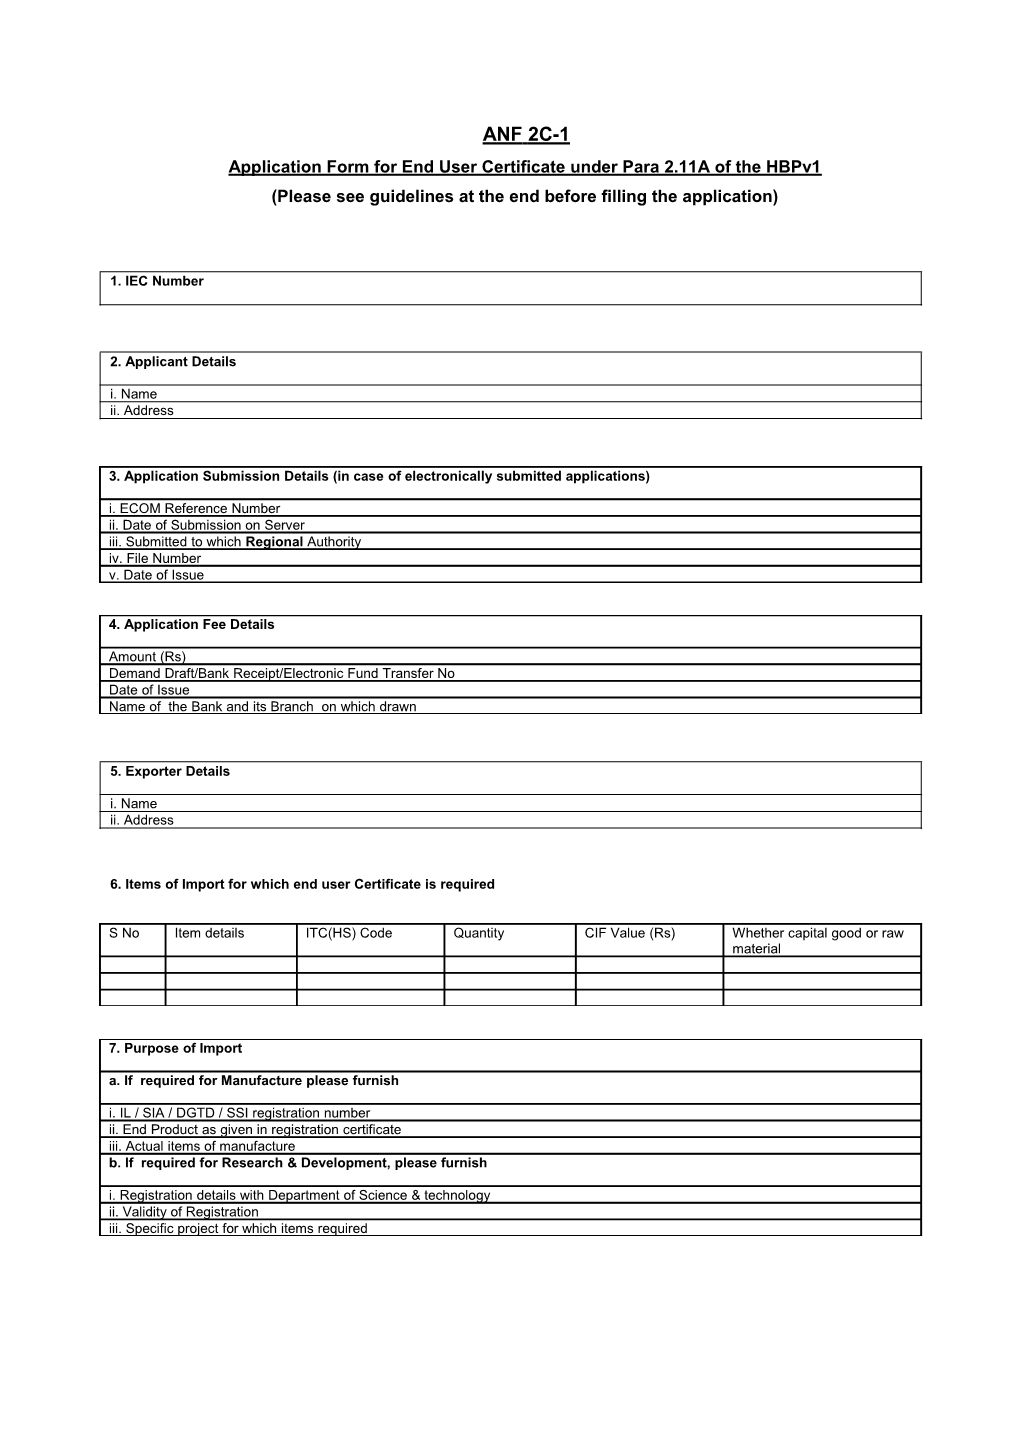 Application Form for End User Certificate Under Para 2.11A of the Hbpv1